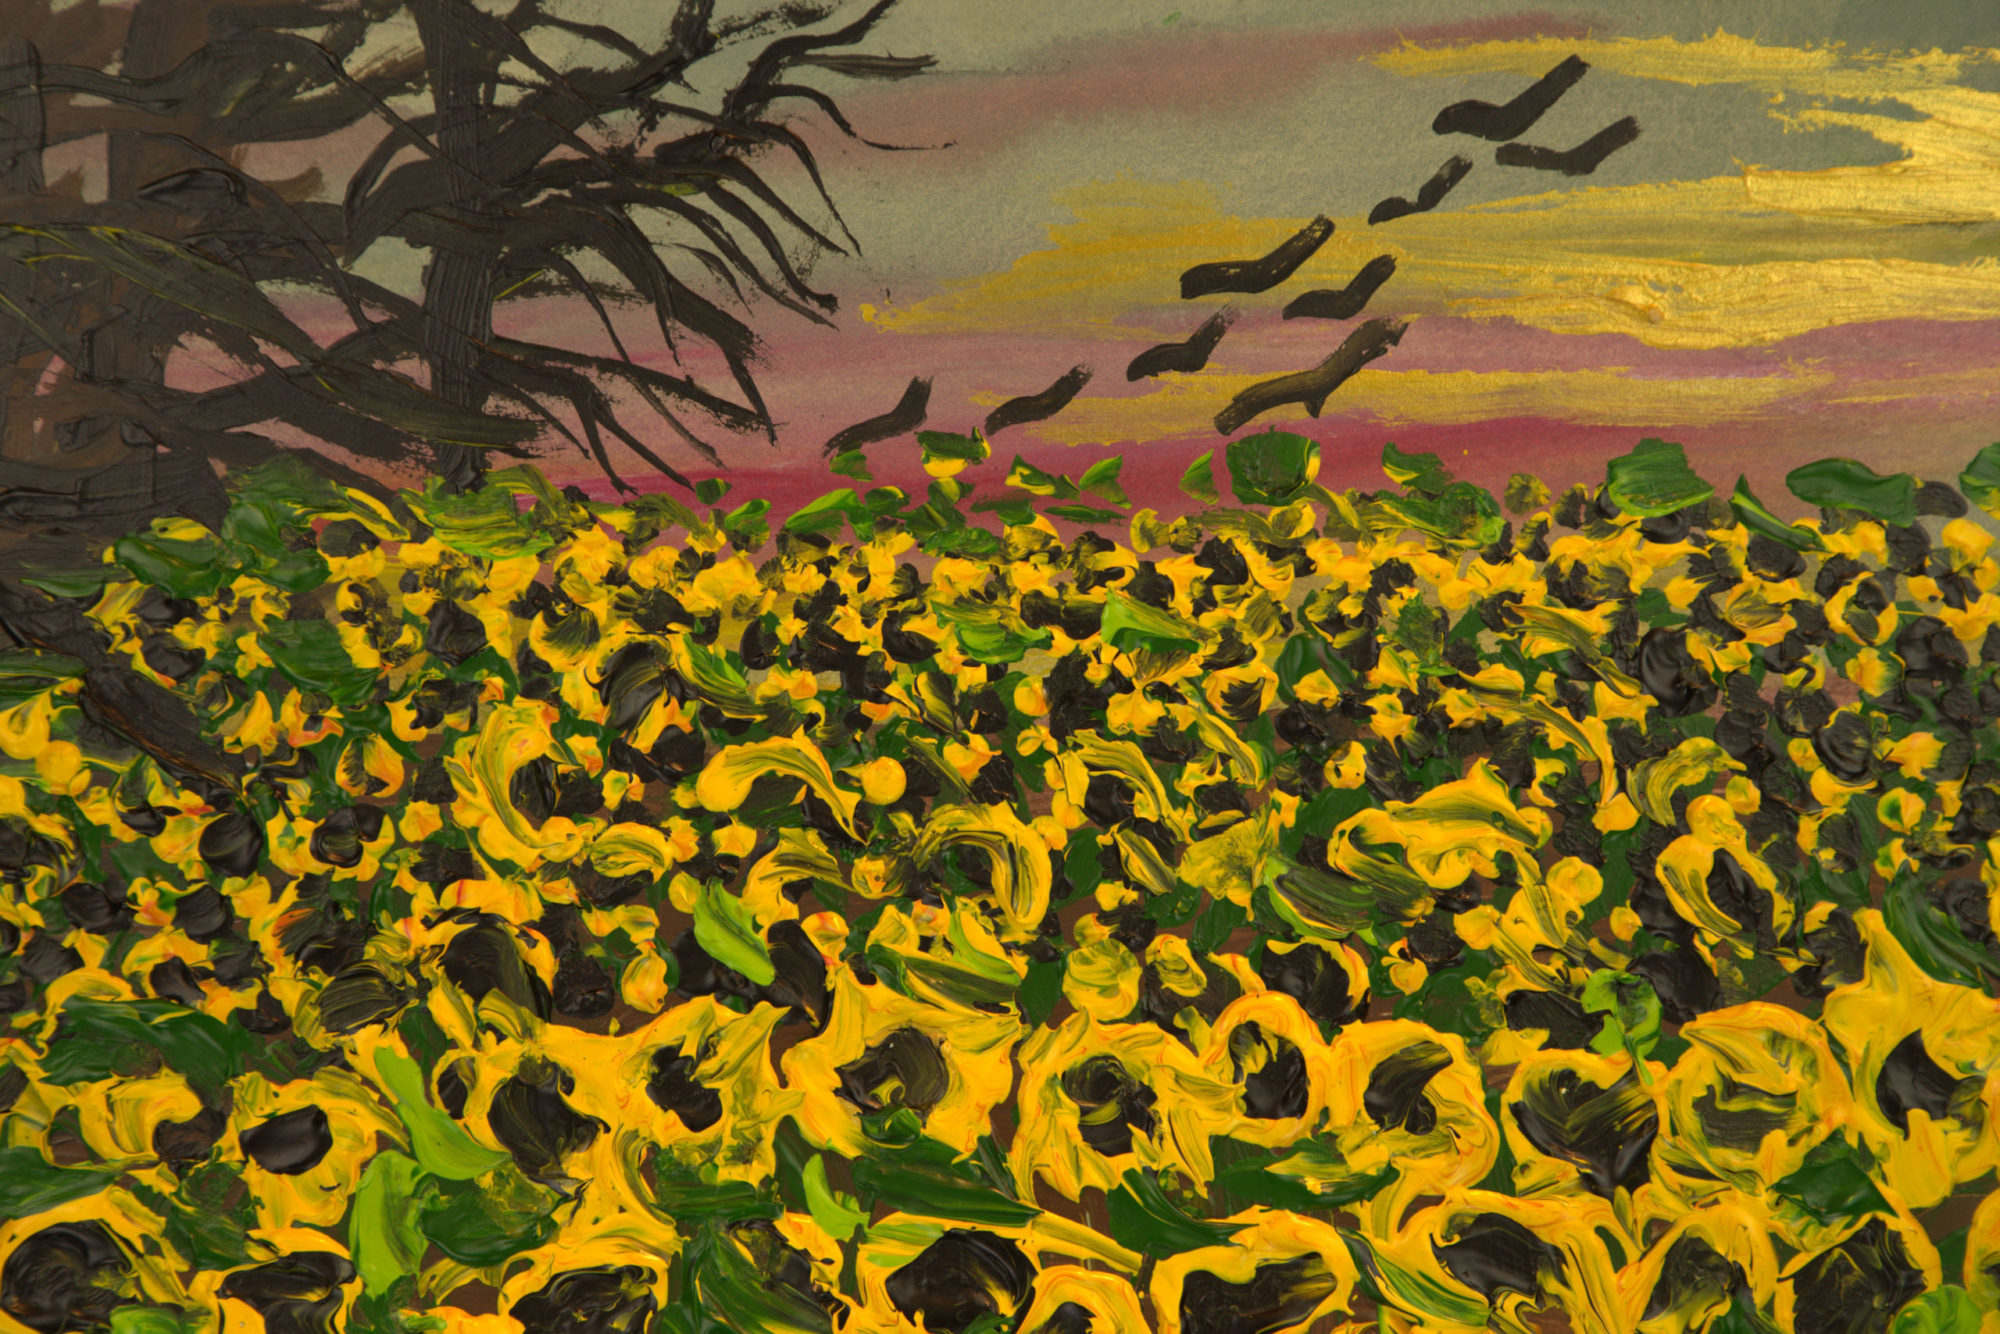 A landscape painting of a field of sunflowers.